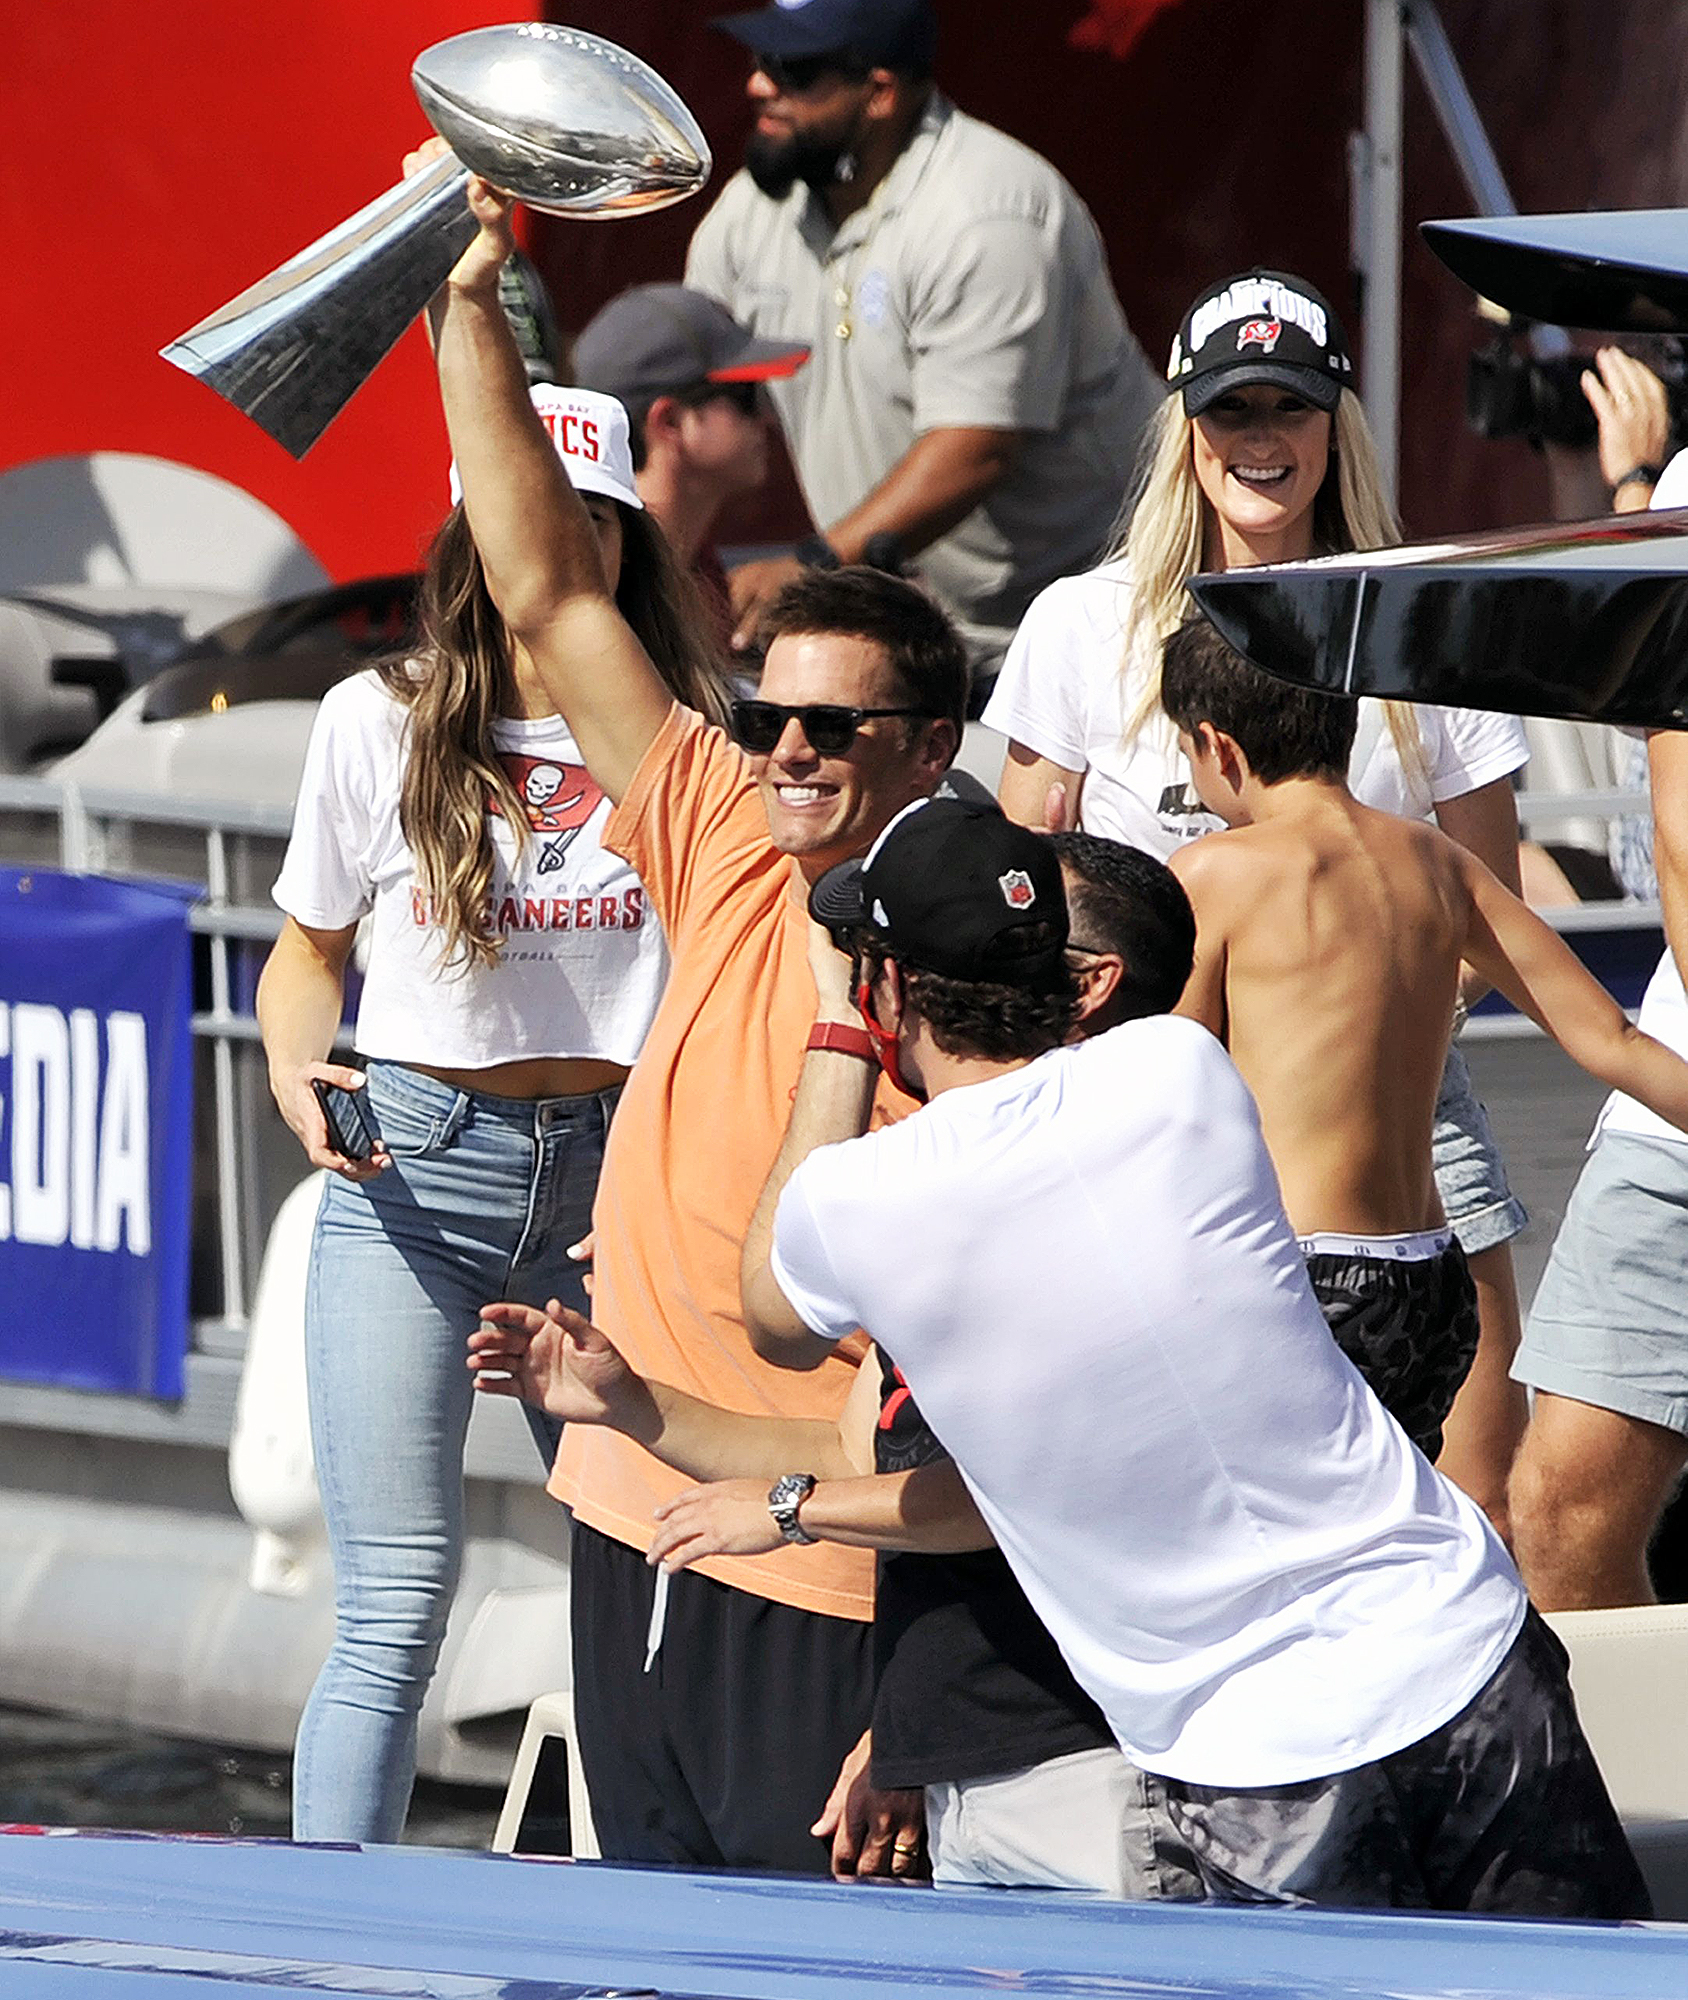 Tom Brady Flexes On His $2 Million Boat At Tampa Bay's Floating Super Bowl  Parade - BroBible